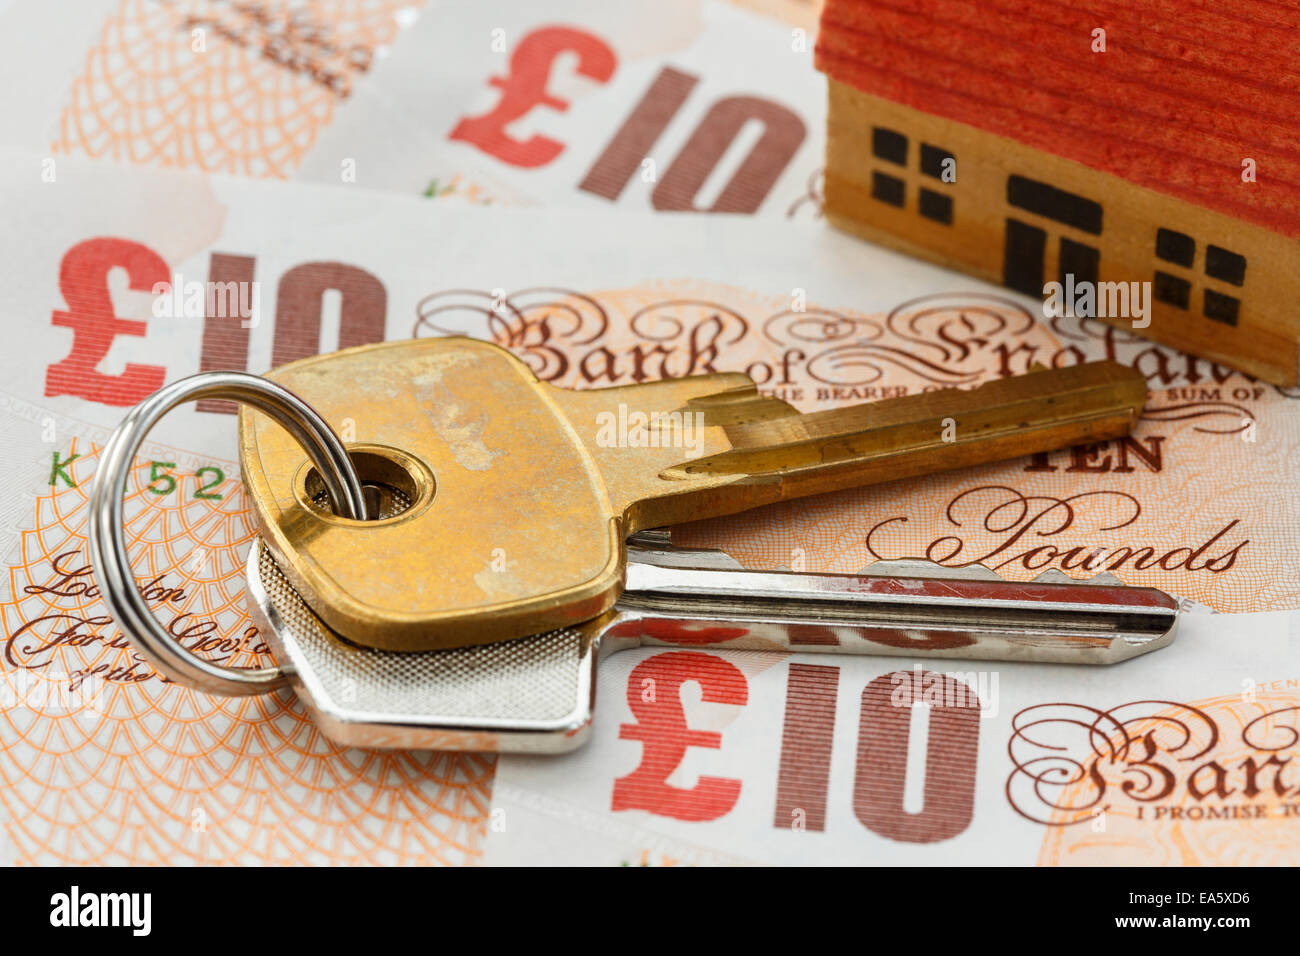 House keys on English money sterling ten pound notes GBP to illustrate UK property tax investment prices savings concept in England UK Britain Stock Photo